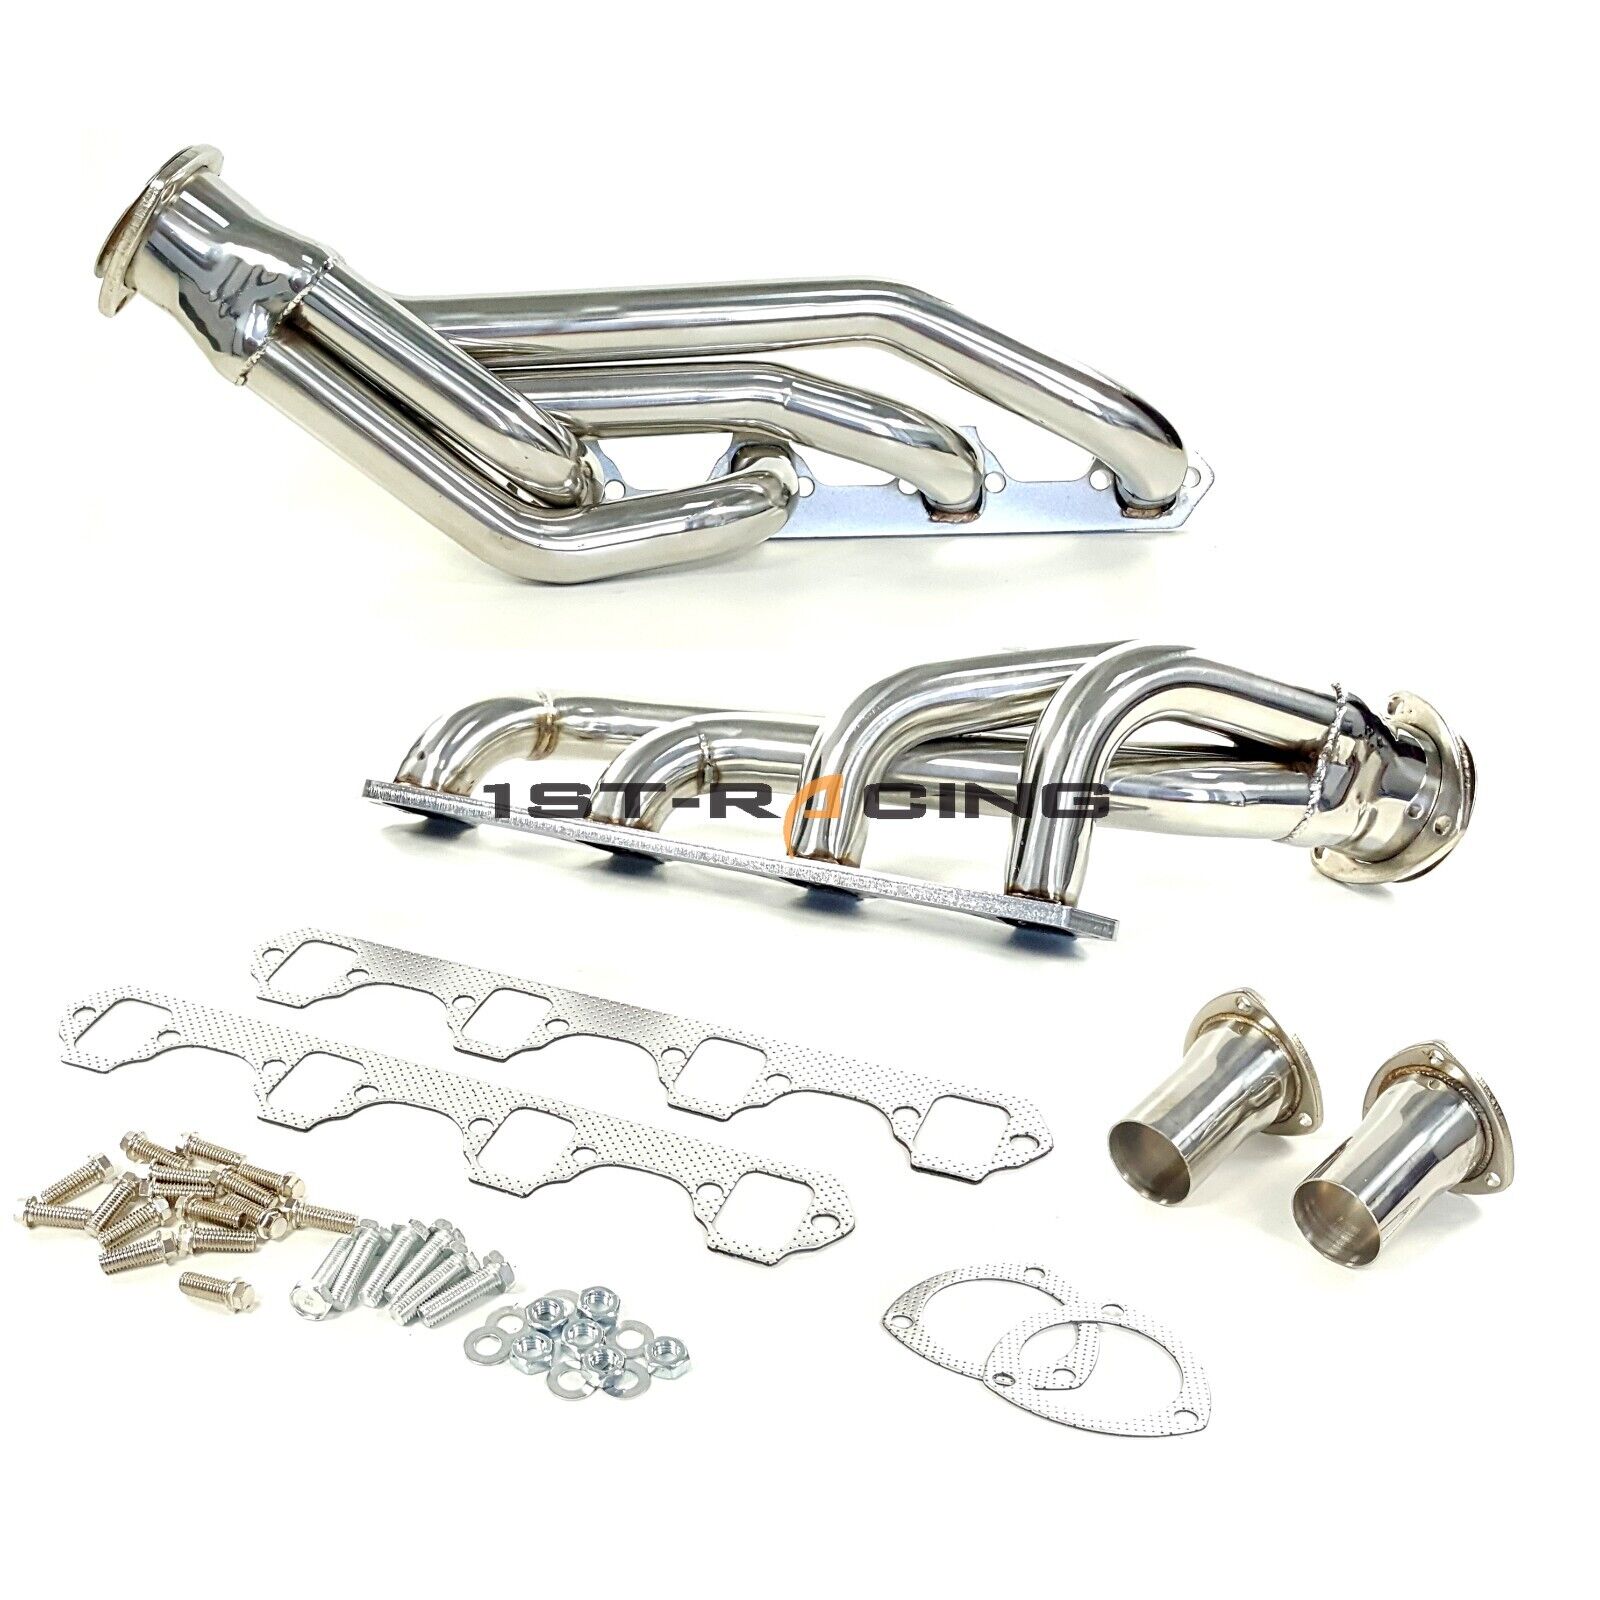 Turbo Exhaust Headers Kit For Ford 1964-1977 260/289/302 SBF Mustang Falcon Come